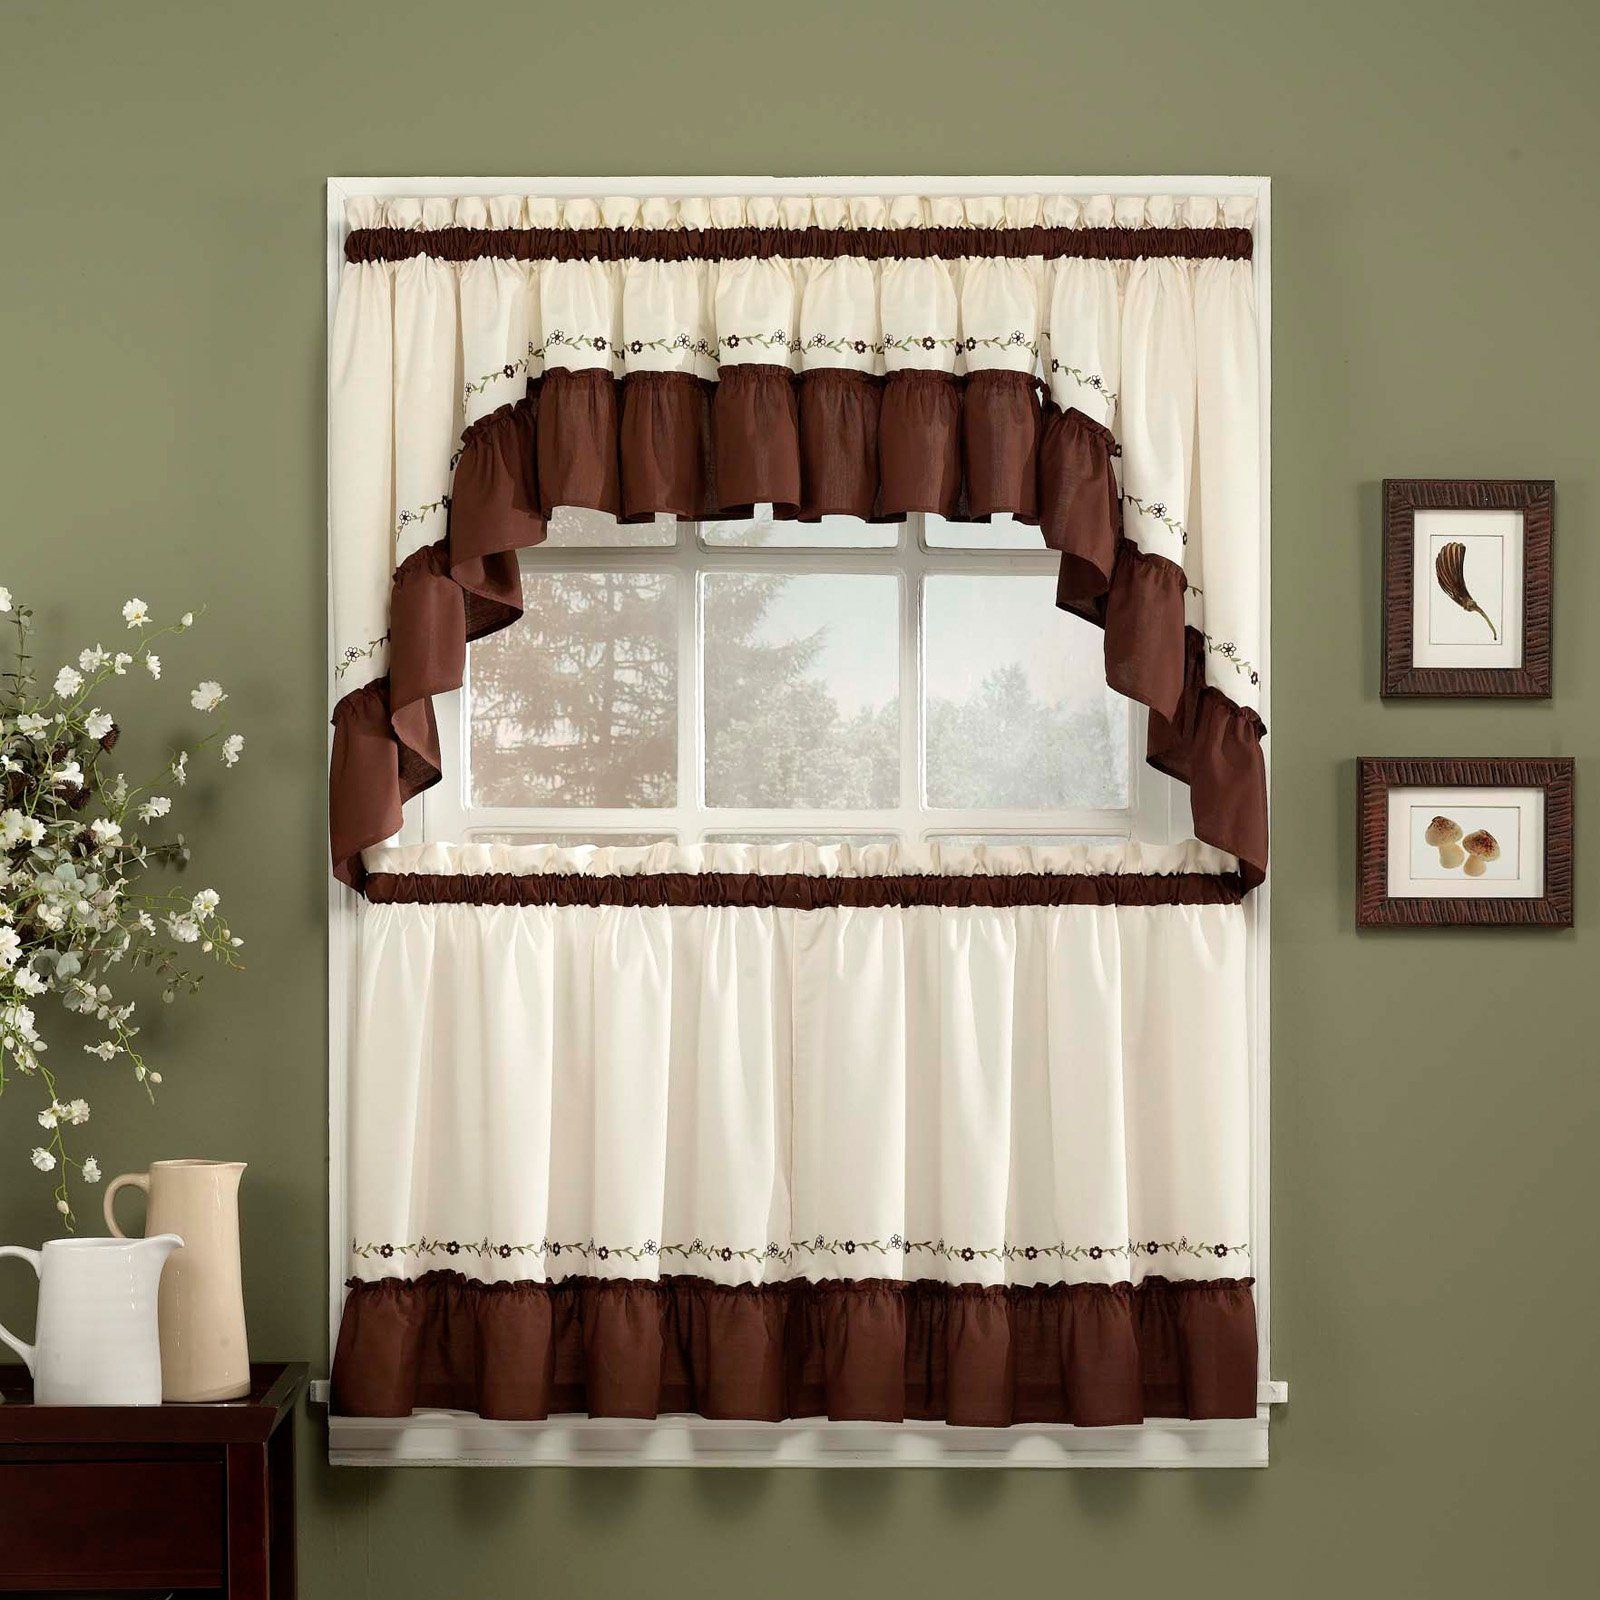 Chf Industries Jayden Window Swag – One Pair Chocolate In For Traditional Tailored Tier And Swag Window Curtains Sets With Ornate Flower Garden Print (View 8 of 20)